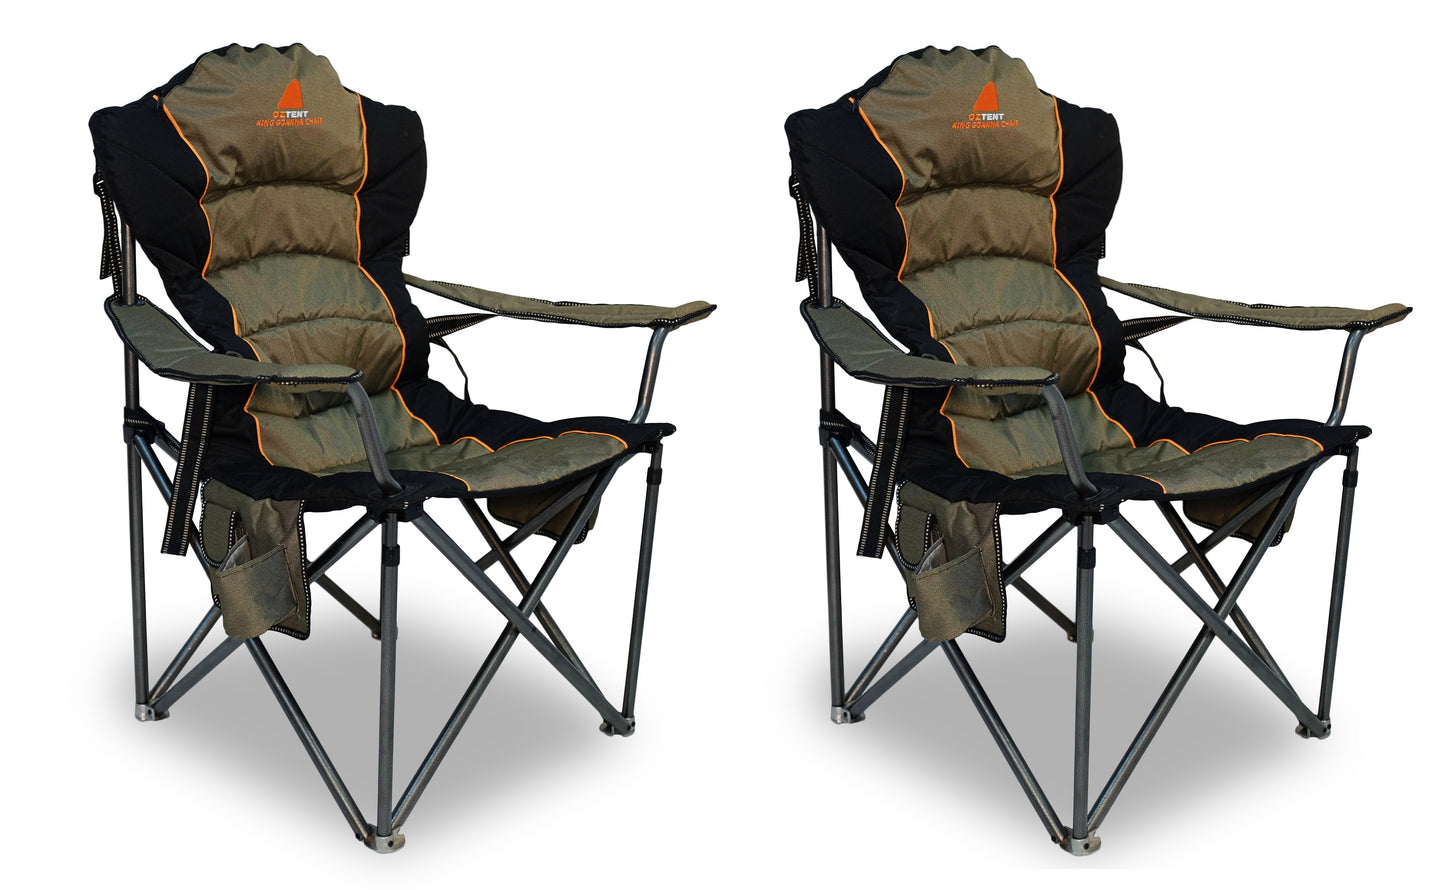 FREE OZTENT SIDEKICK when bought with a Pair King Goanna Chairs